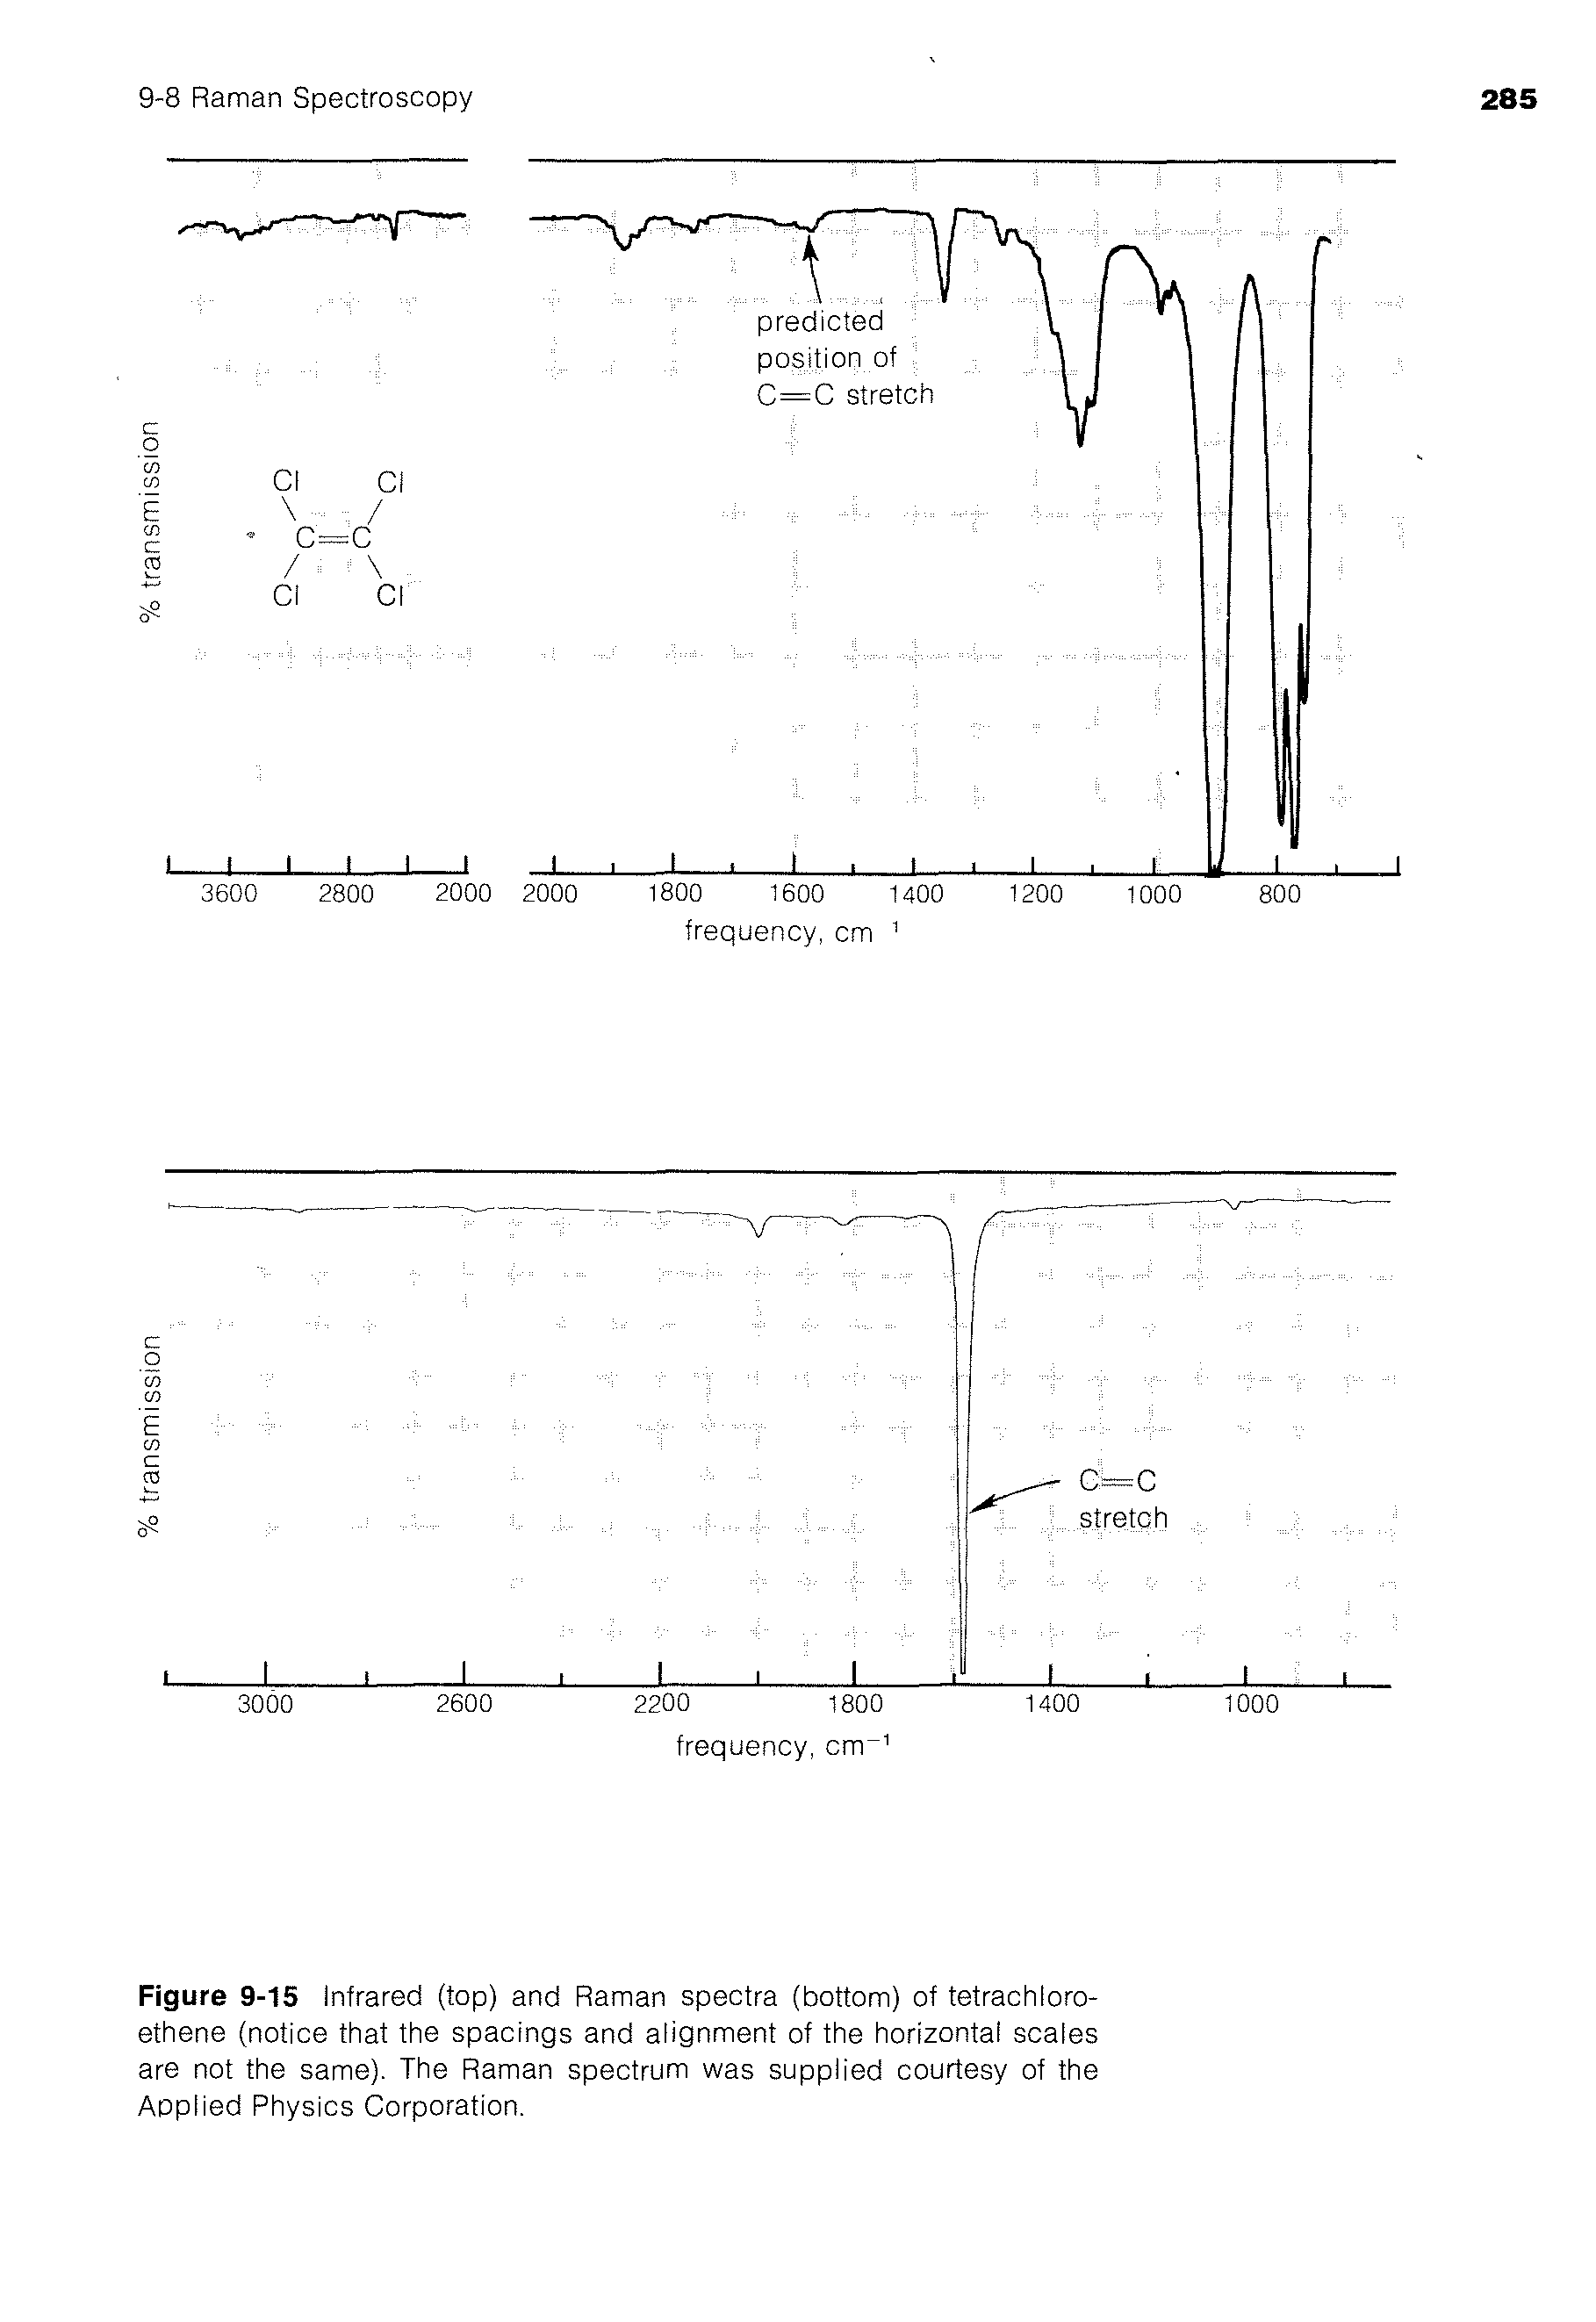 Figure 9-15 Infrared (top) and Raman spectra (bottom) of tetrachloro-ethene (notice that the spacings and alignment of the horizontal scales are not the same). The Raman spectrum was supplied courtesy of the Applied Physics Corporation.